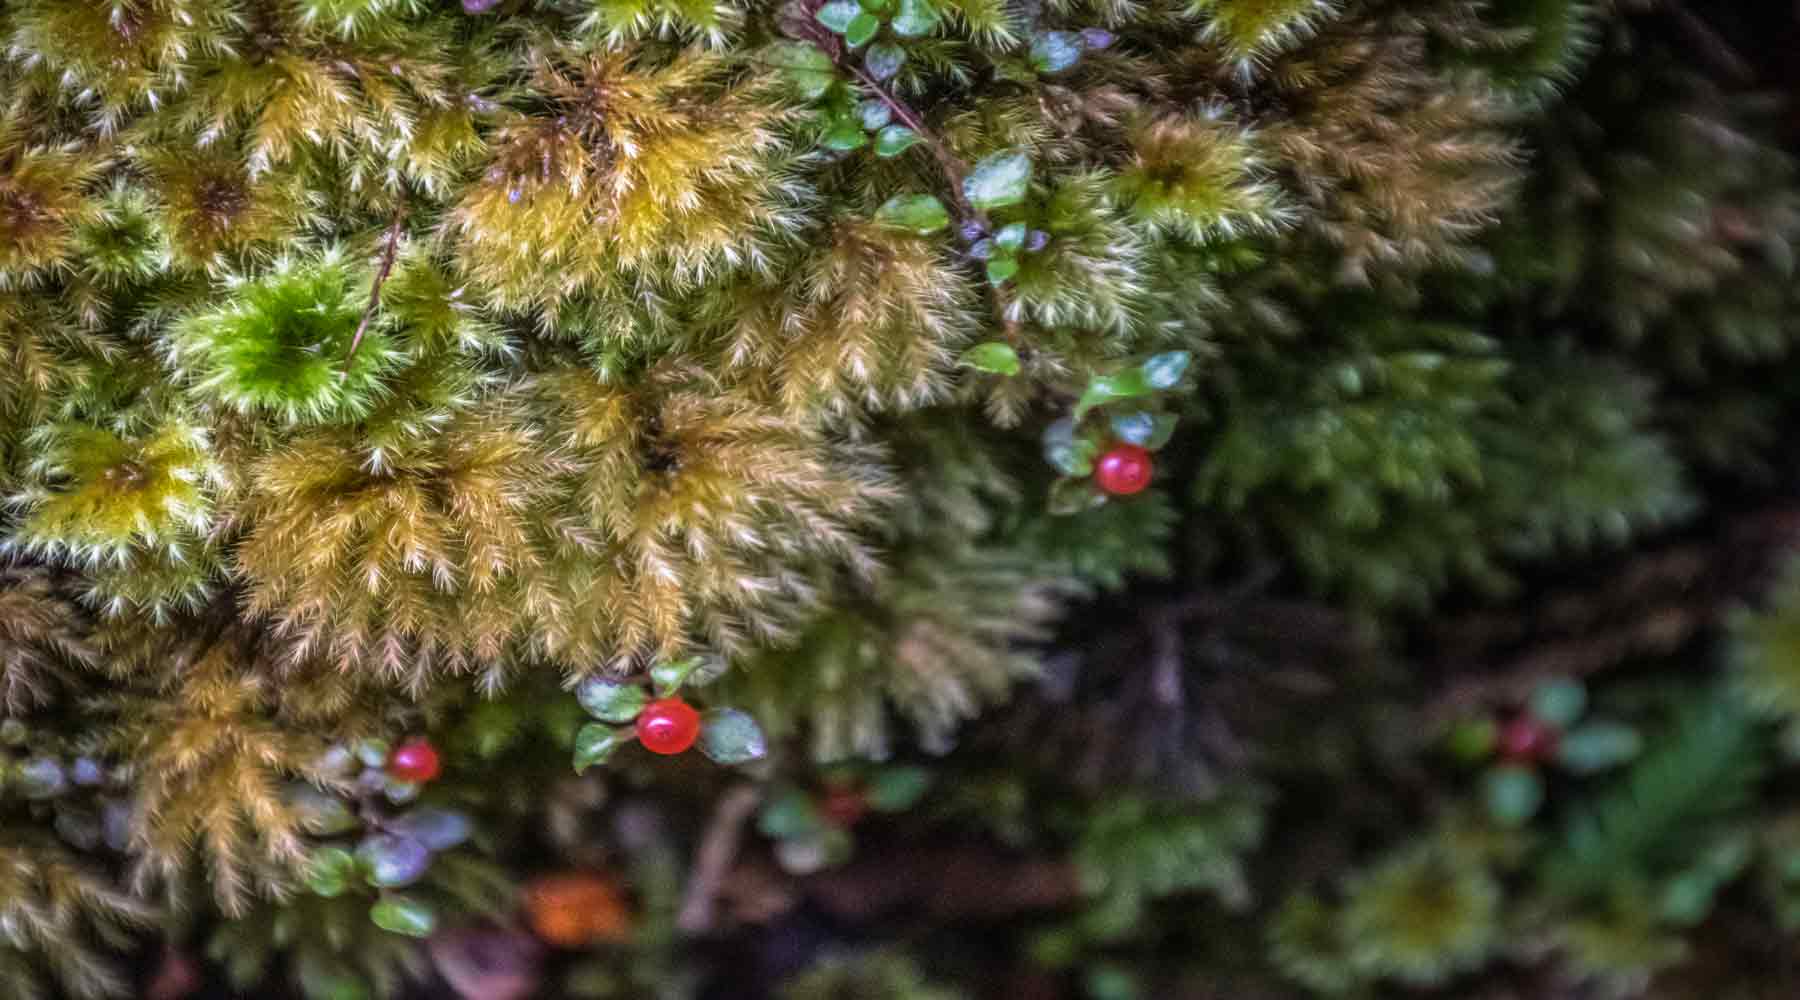 Close up of intricate moss with red berries on it Franz Josef New Zealand